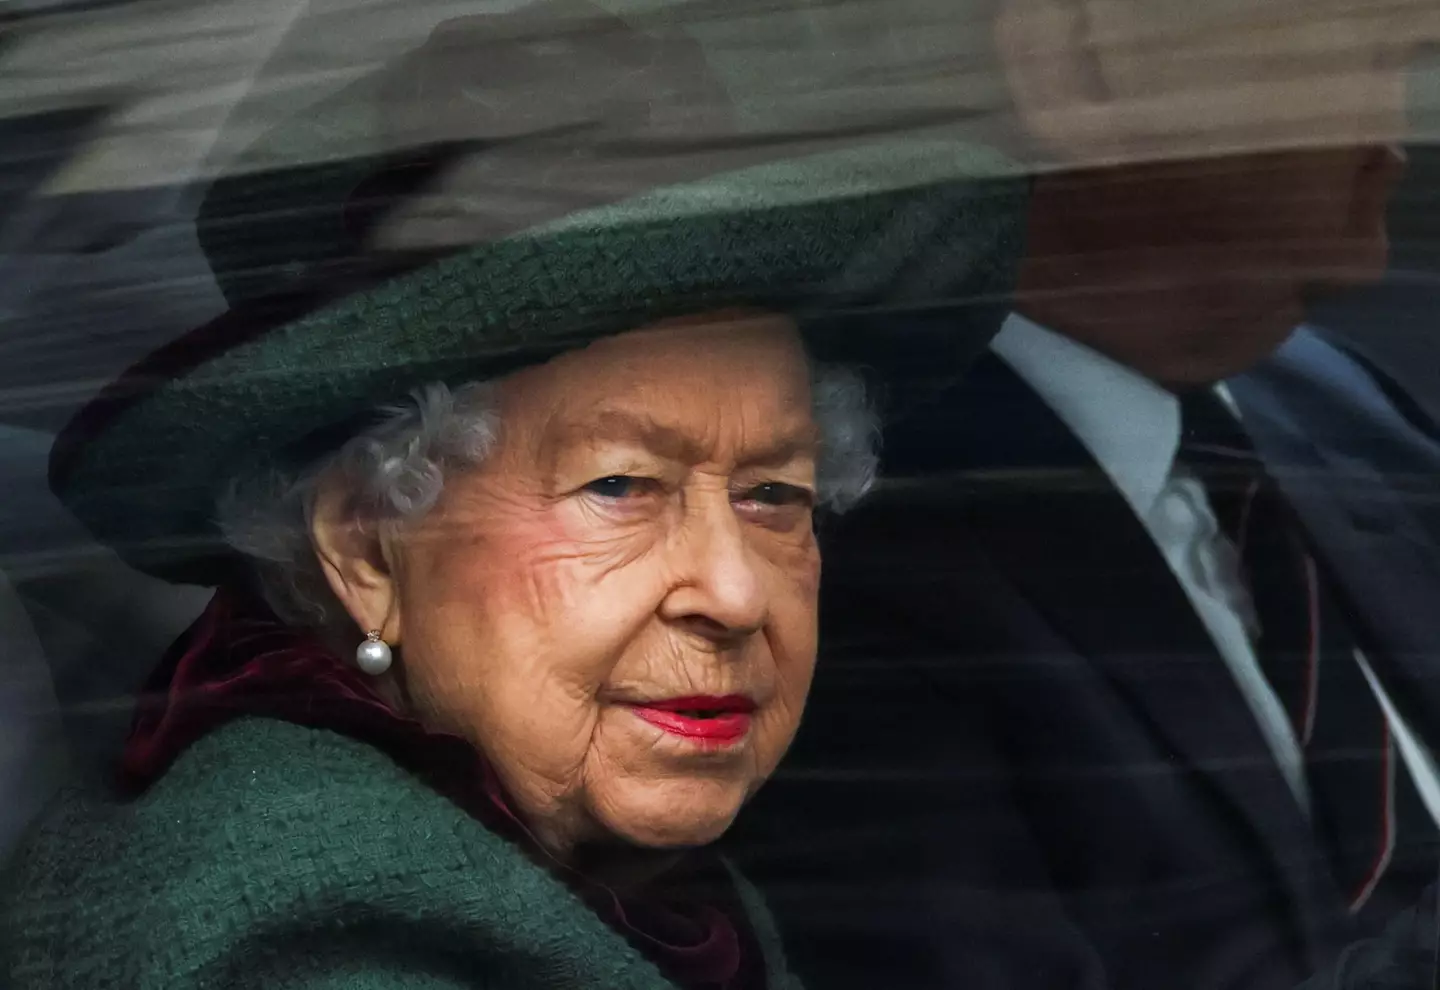 The Queen arriving at the memorial service (